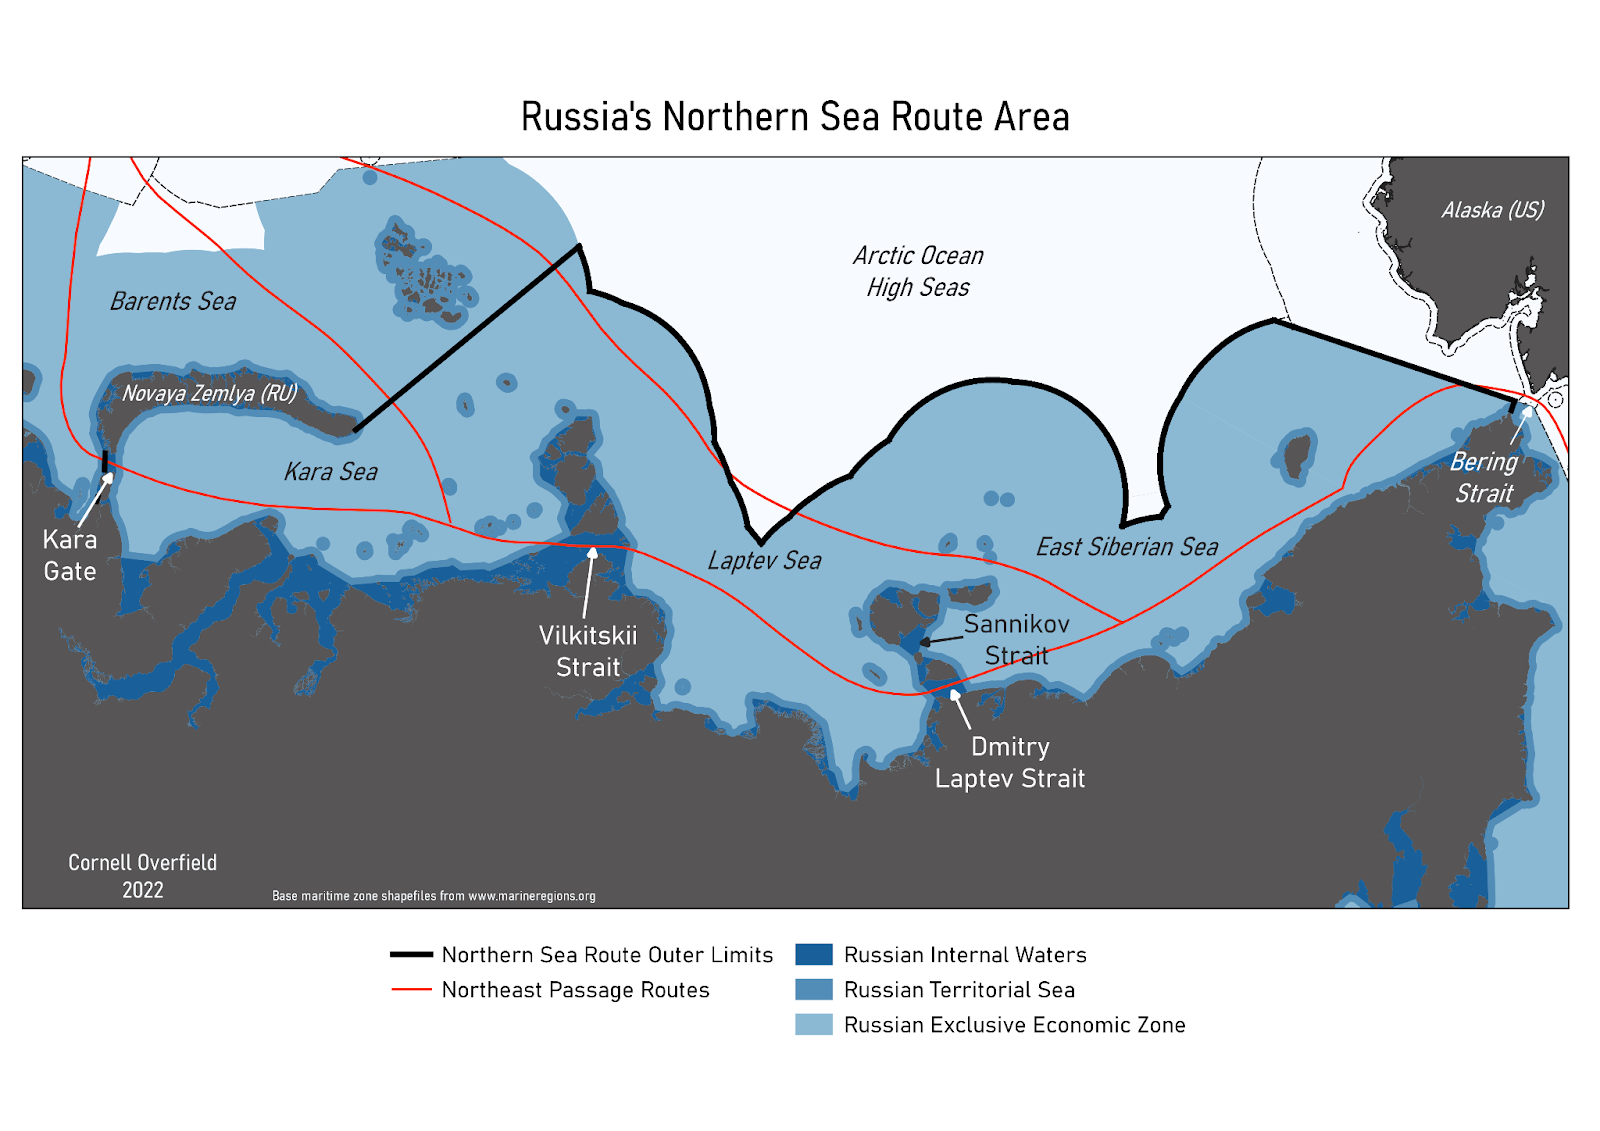 Figure 1 shows the Northern Sea Route area as a part of Russia’s exclusive economic zone (light blue), territorial sea (medium blue), and internal waters (dark blue). The outer limits of the NSR area are marked with a thick black line, running north of Novaya Zemlya, along the outer edge of the Russian EEZ, and down the Russian-U.S. border in the Bering Strait. Possible routes of the Northeast Passage are marked with a red line and key straits are also highlighted. 